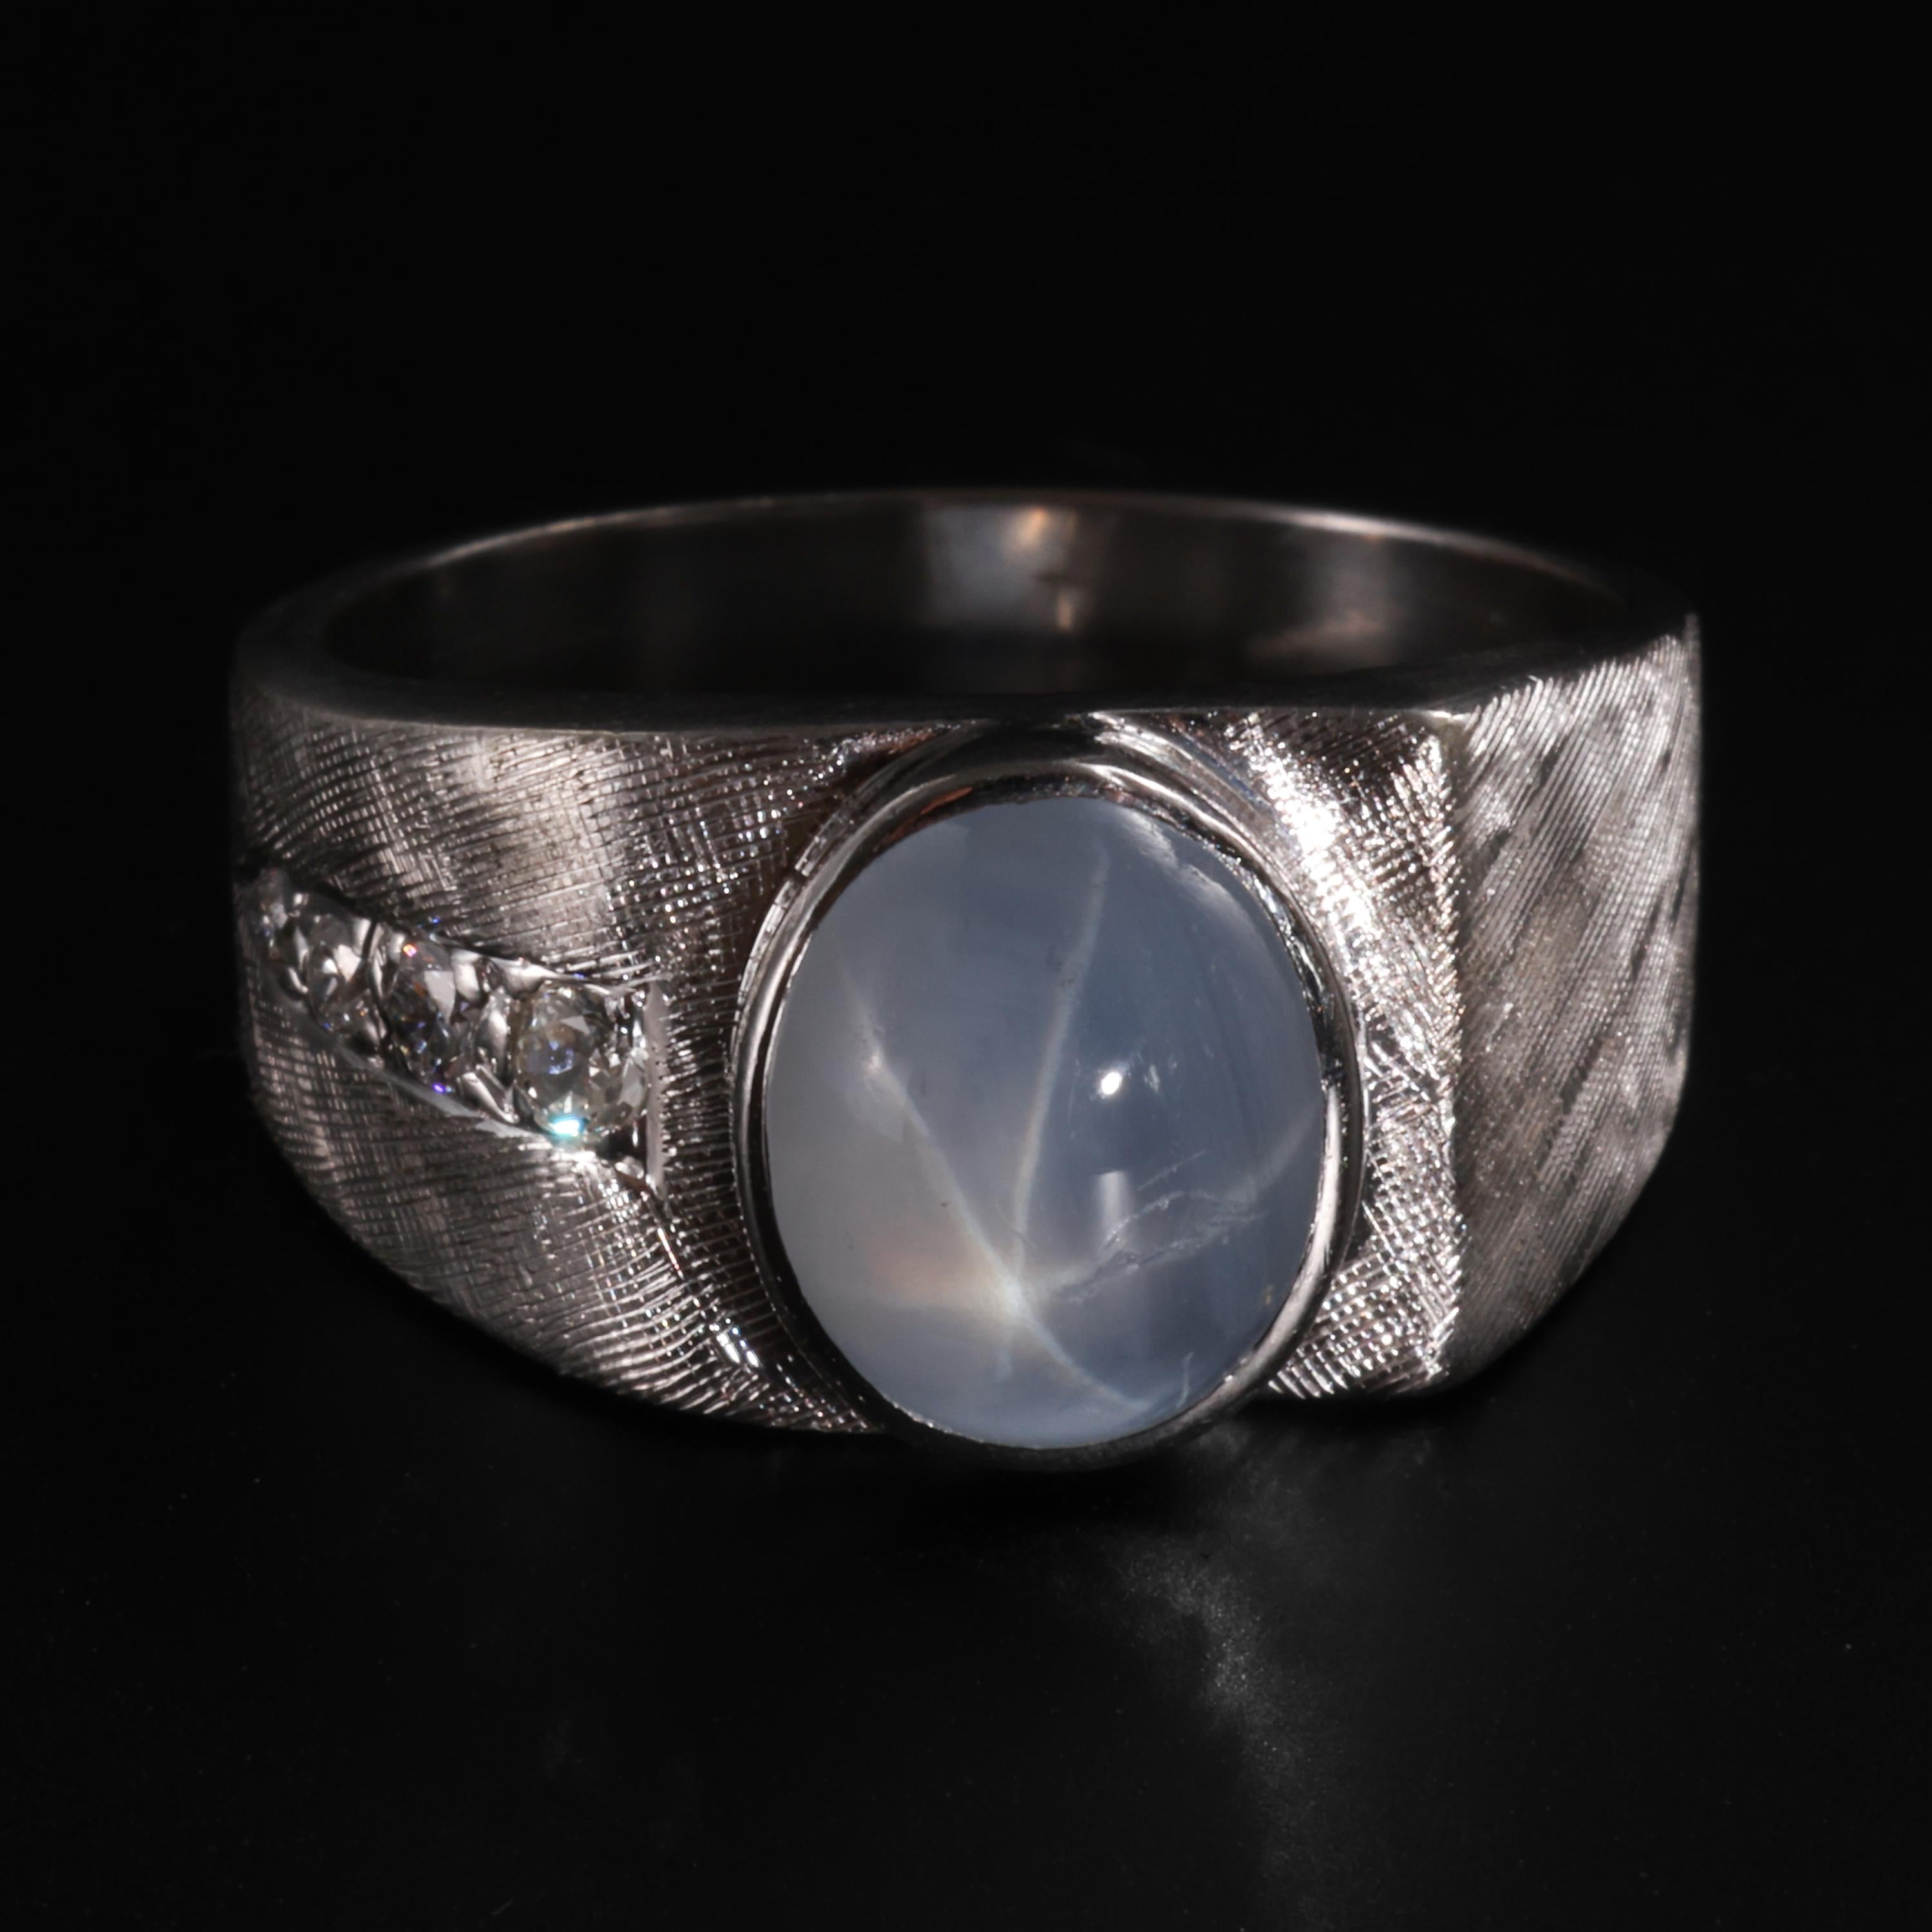 This 14K white gold star sapphire ring was created in the 1950s or early 1960s and apparently locked away in a safe until I came along. The hand-etched Florentine finish is not only impeccably executed by the jeweler who created this fine ring, but